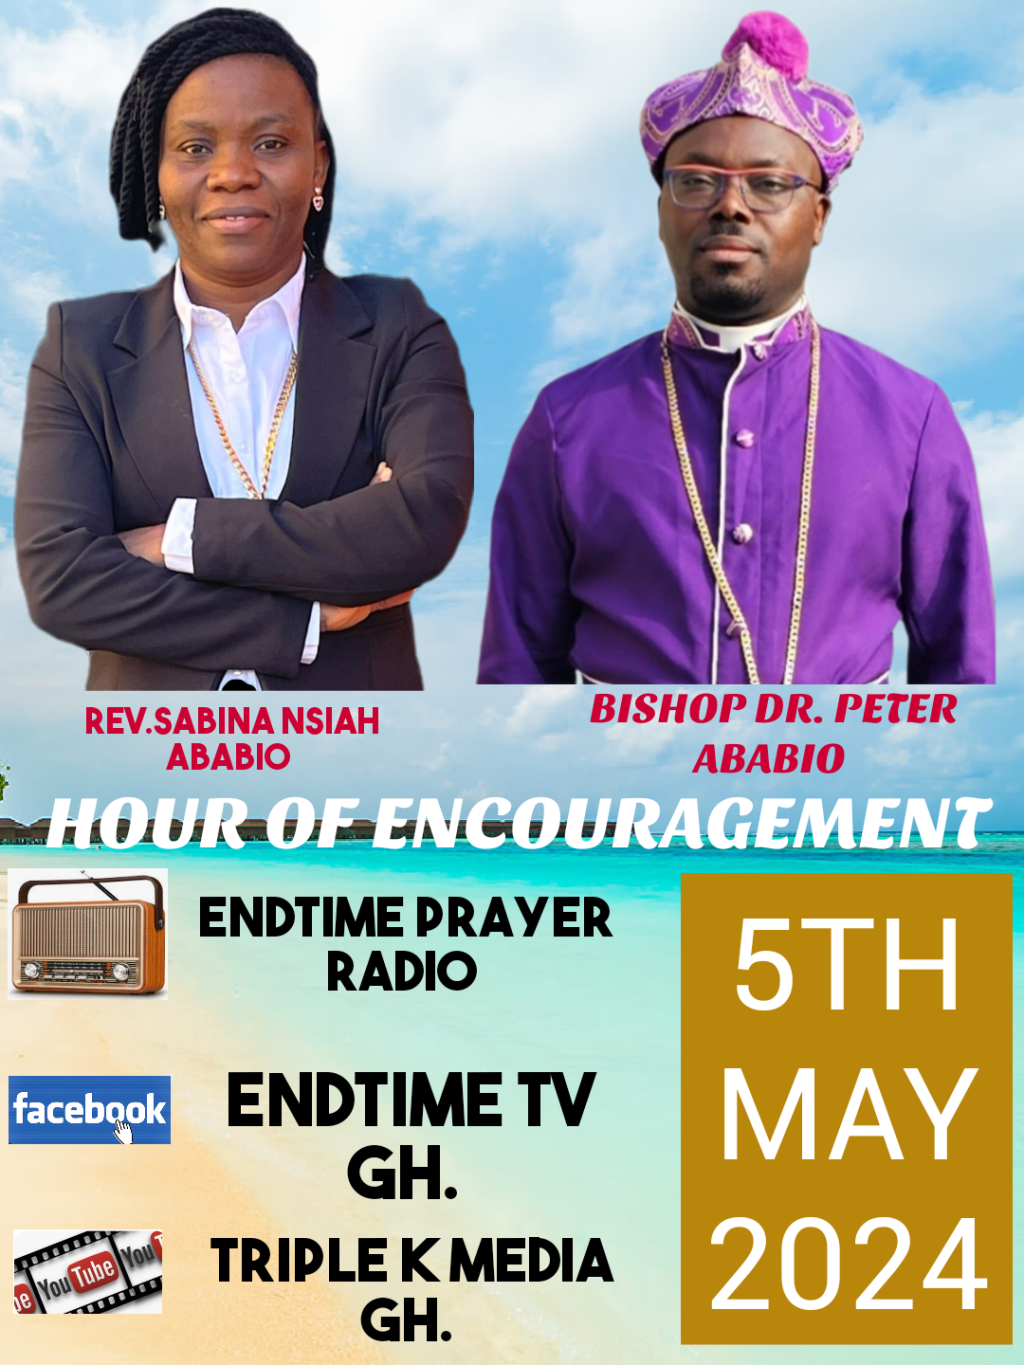 ON ENDTIME TV WHEN REV SABINA NSIAH ABABIO, THE HOSTER OF HOUR OF ENCOURAGEMENT  ON FACEBOOK BISHOP DR. PETER ABABIO SAID SOMETHING ON THE PROGRAMME